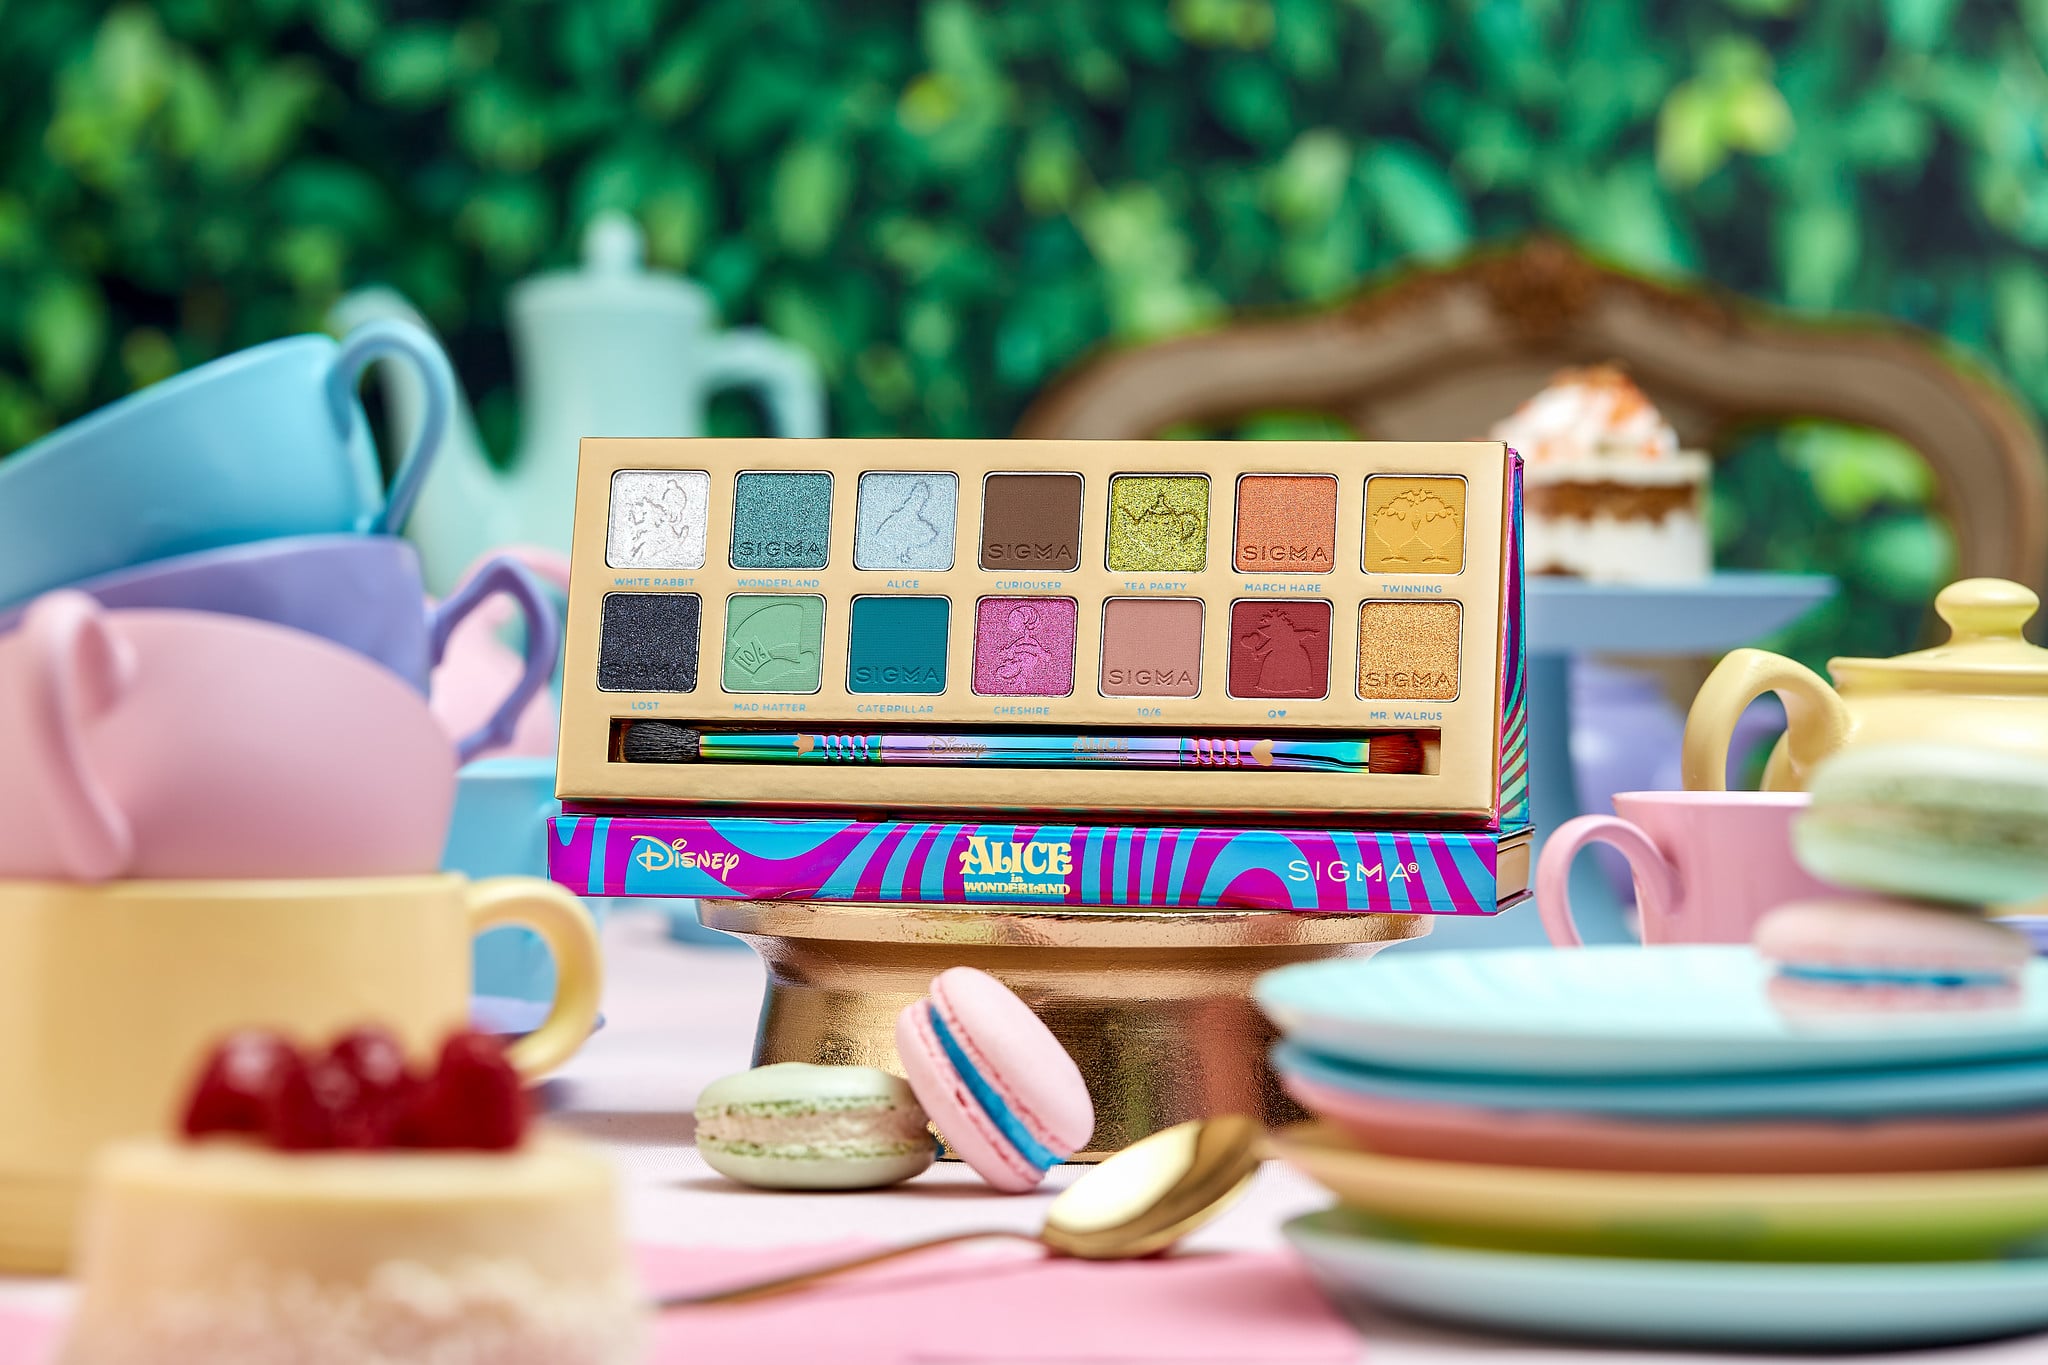 ALICE🗝️🫖💙. @sigmabeauty Alice In Wonderland Collection😍. Get